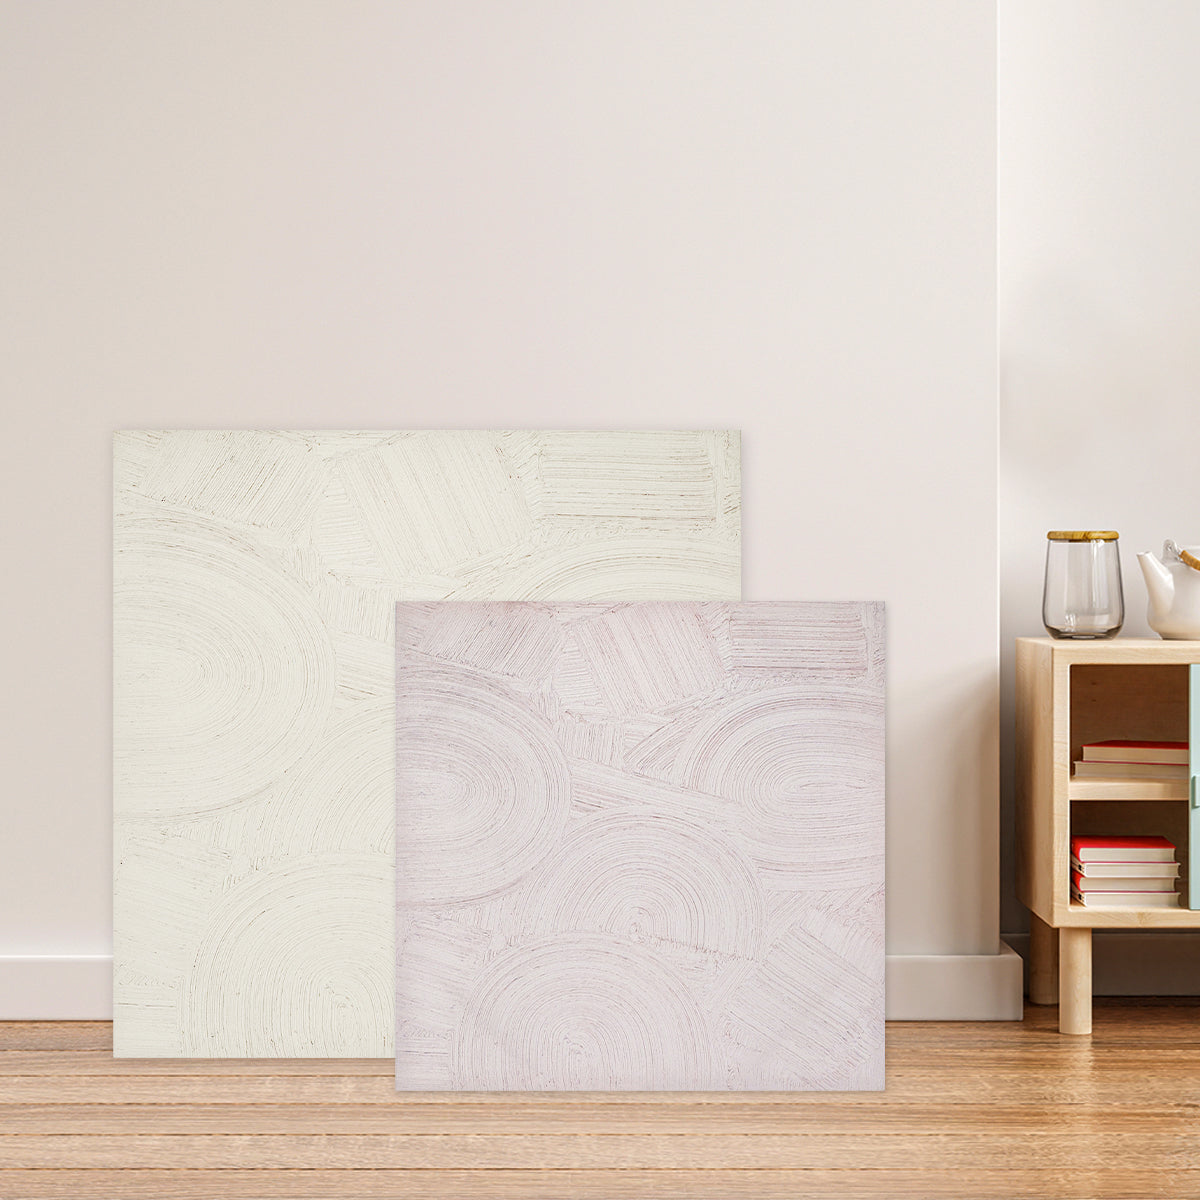 Abstract textured wall art affordable oil painting unframed white zen square in two sizes